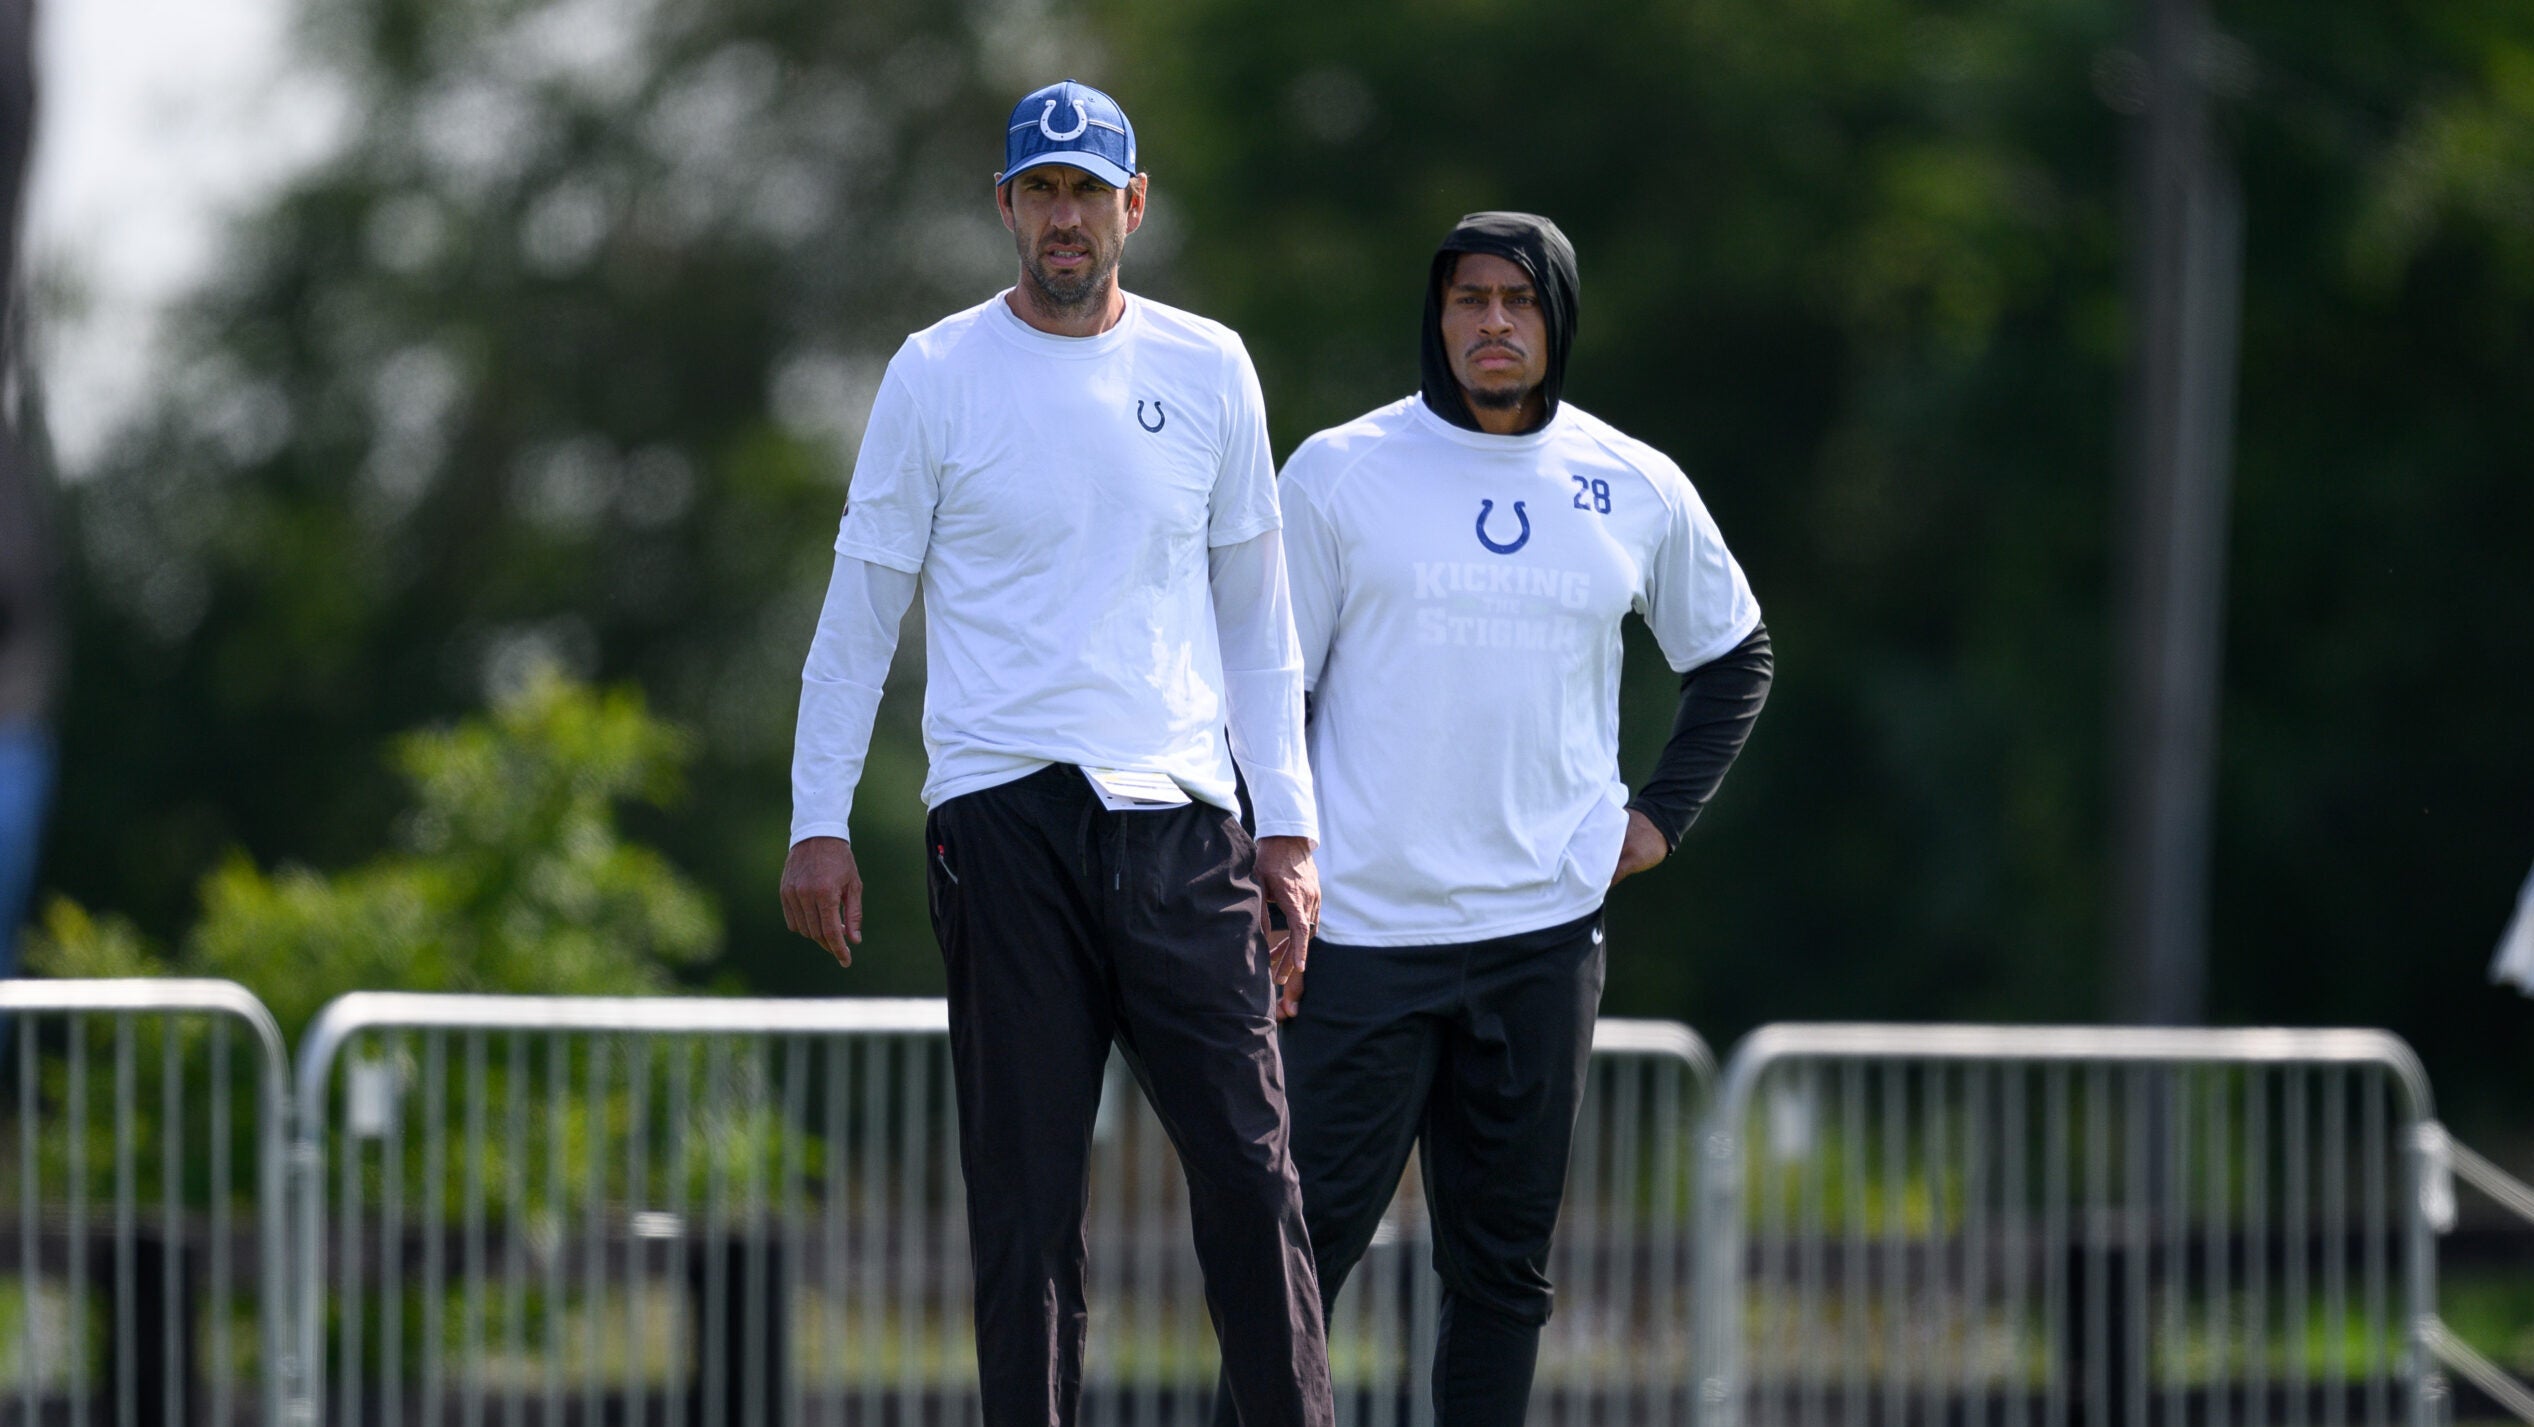 We'll see': Colts' Shane Steichen on Jonathan Taylor's status for